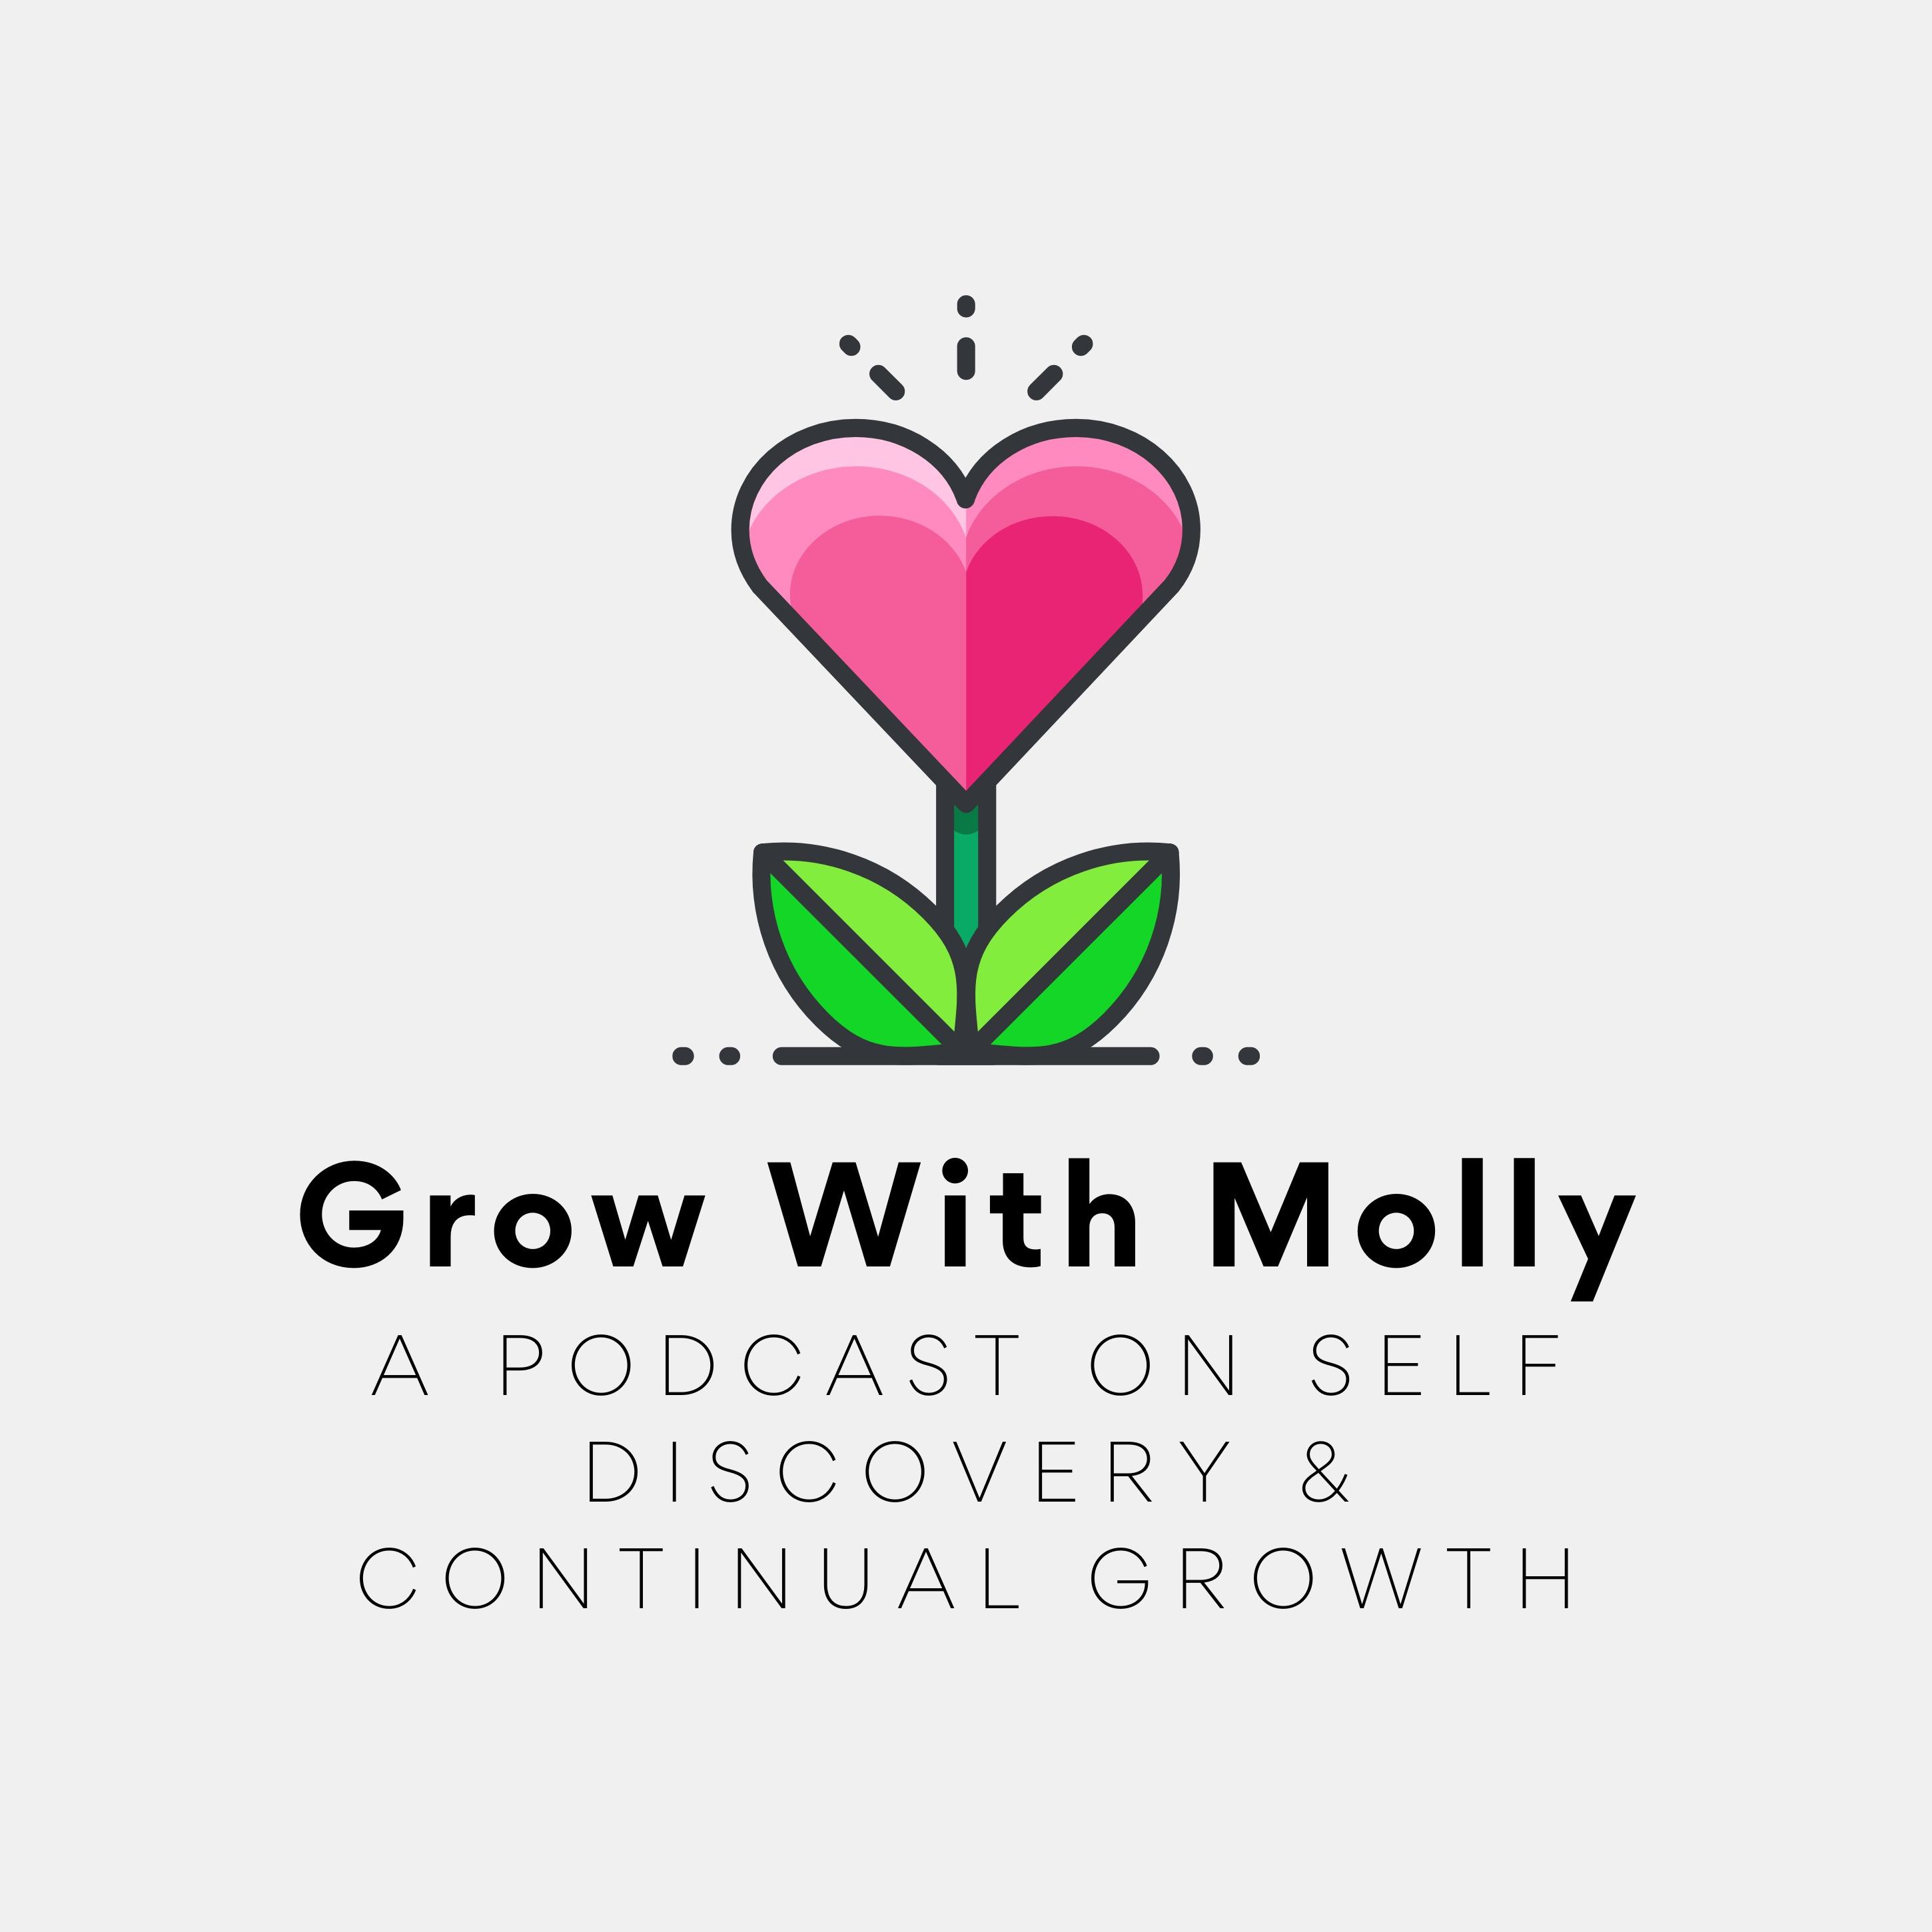 Grow With Molly